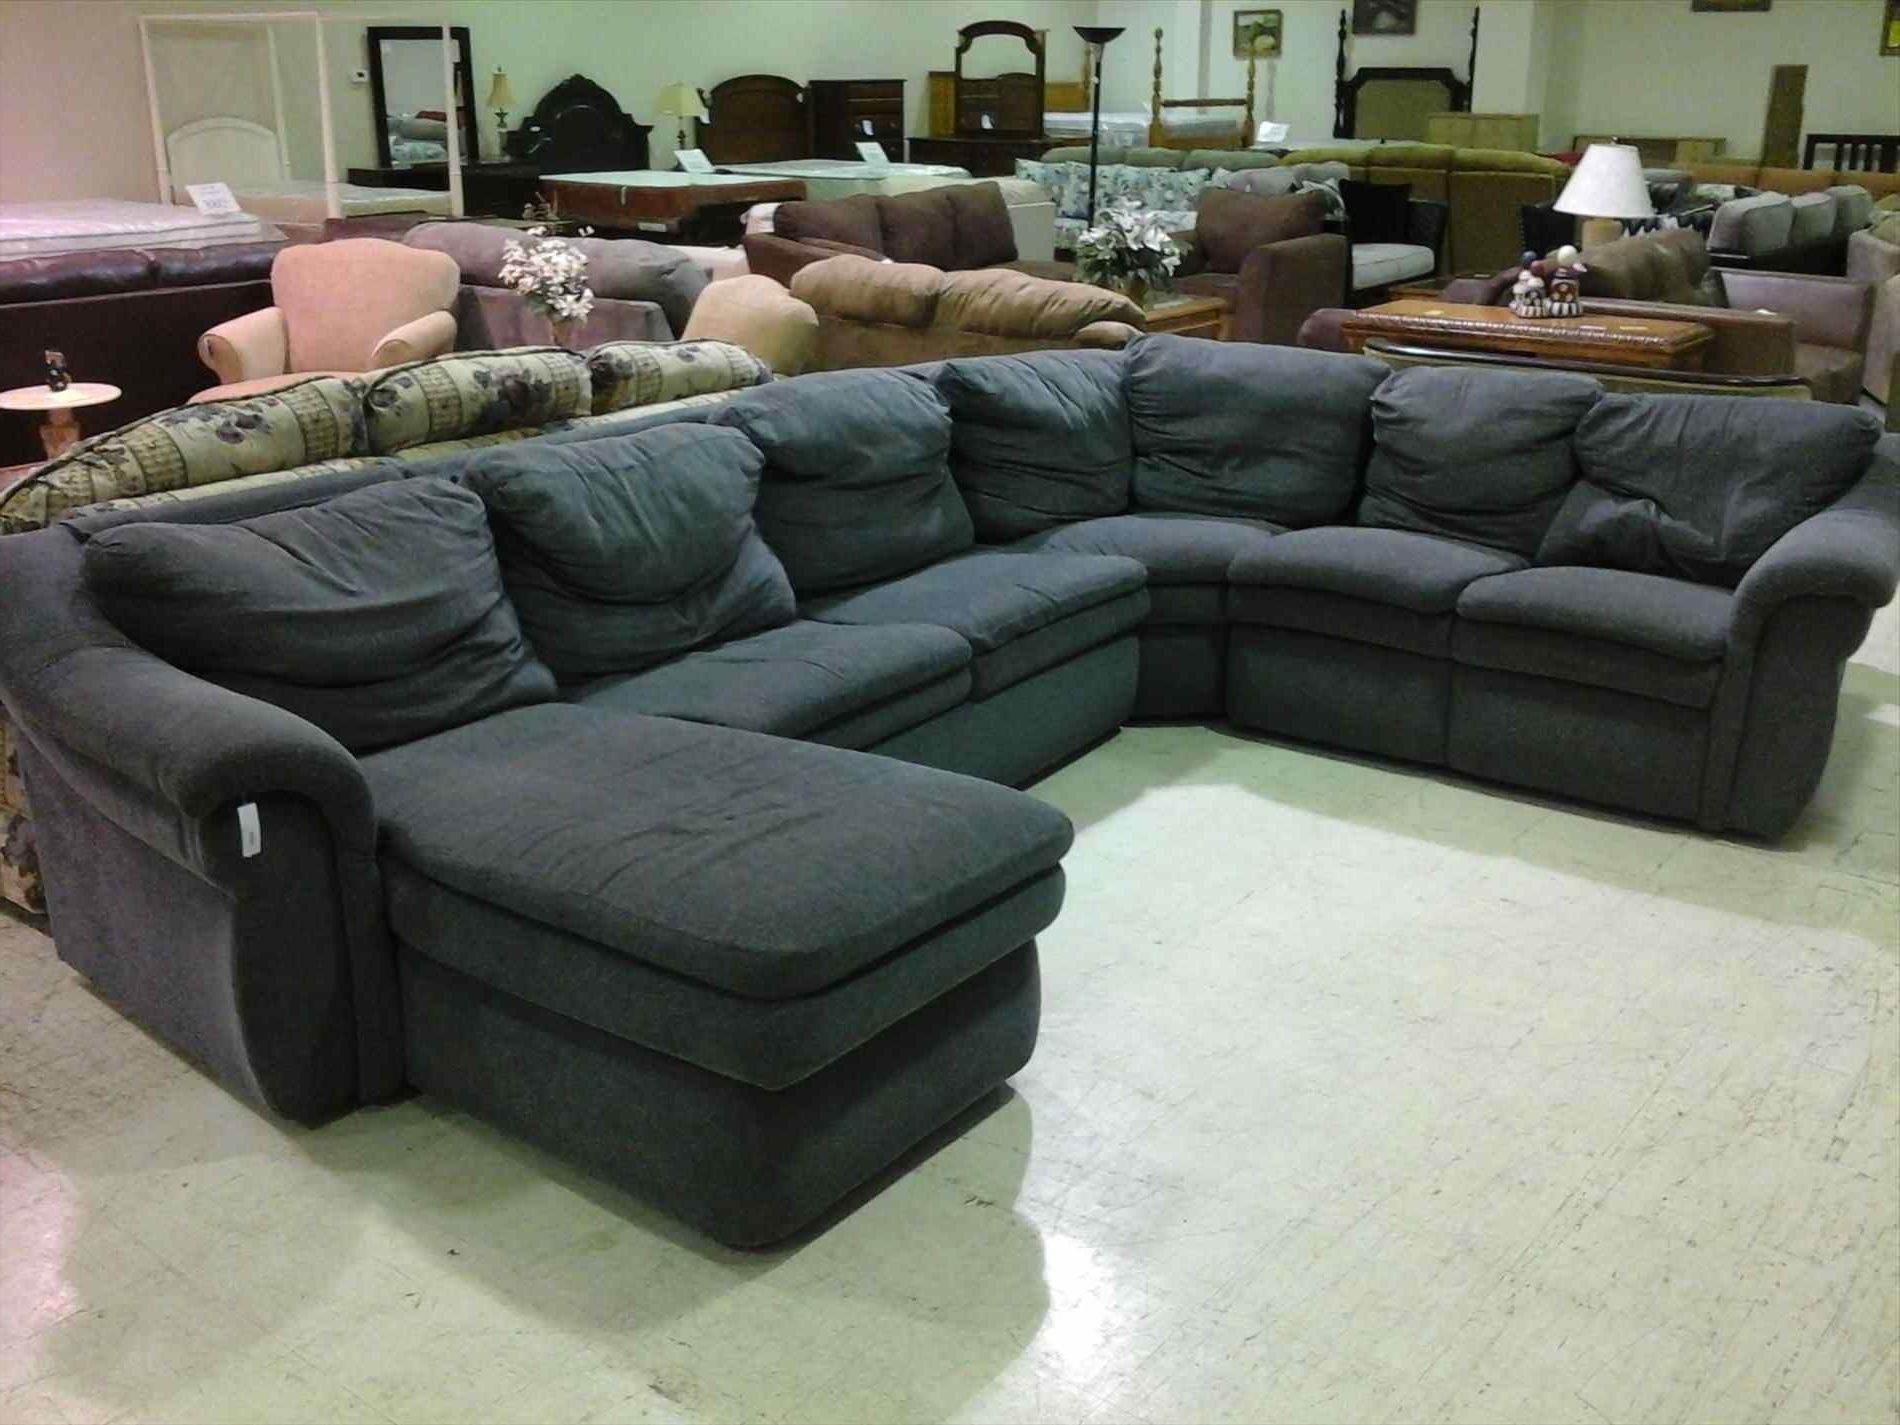 Cathygirl Within Recent Oakville Sectional Sofas (View 8 of 20)